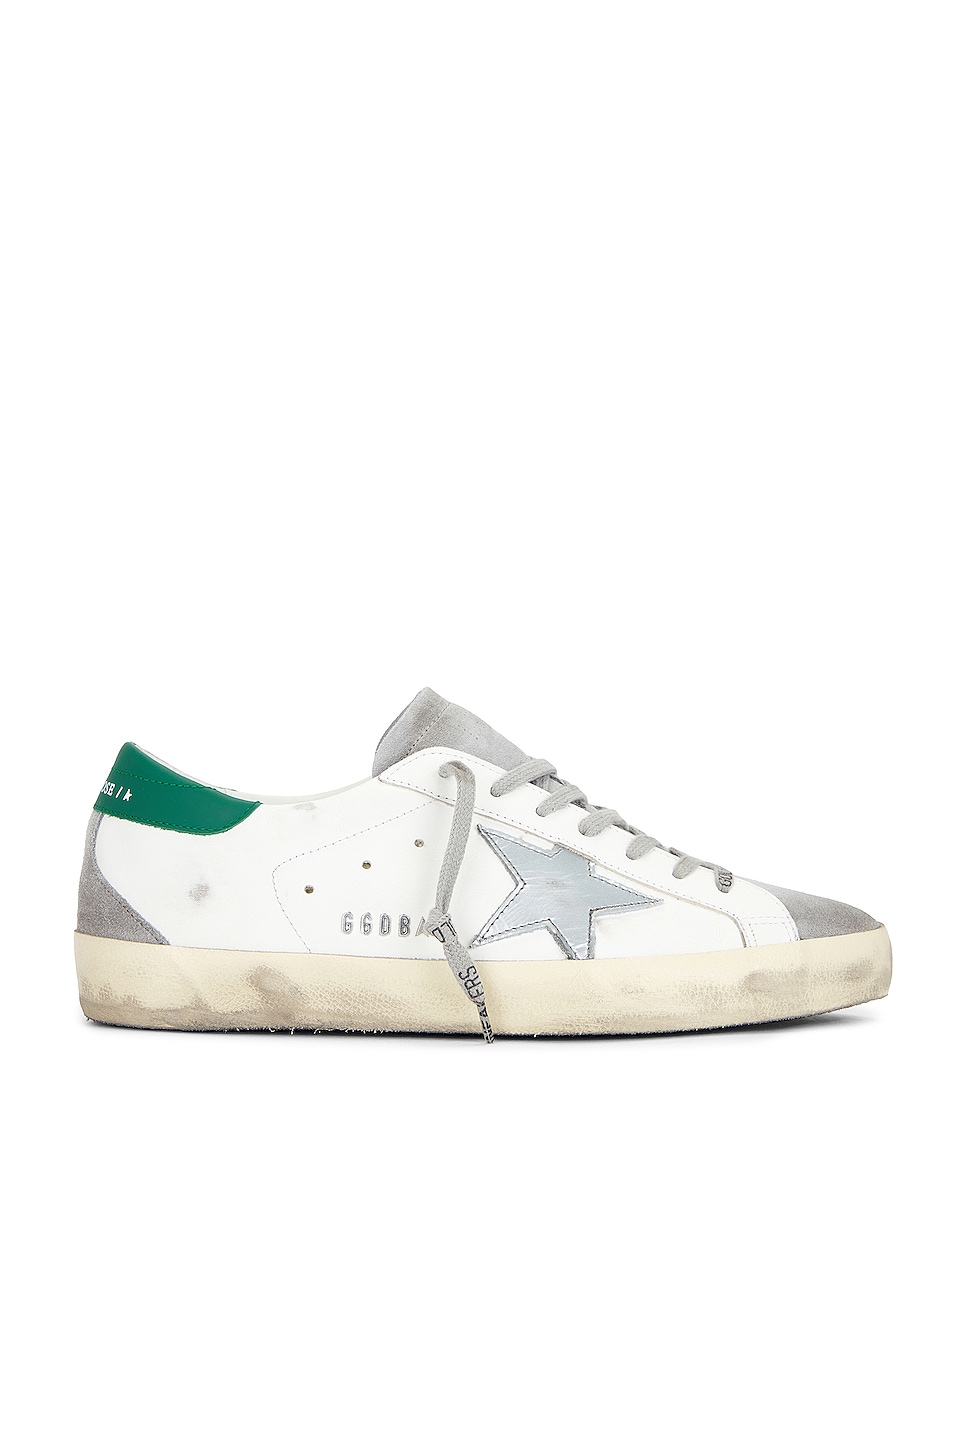 Image 1 of Golden Goose Super Star Leather Suede Toe in White, Grey, & Green